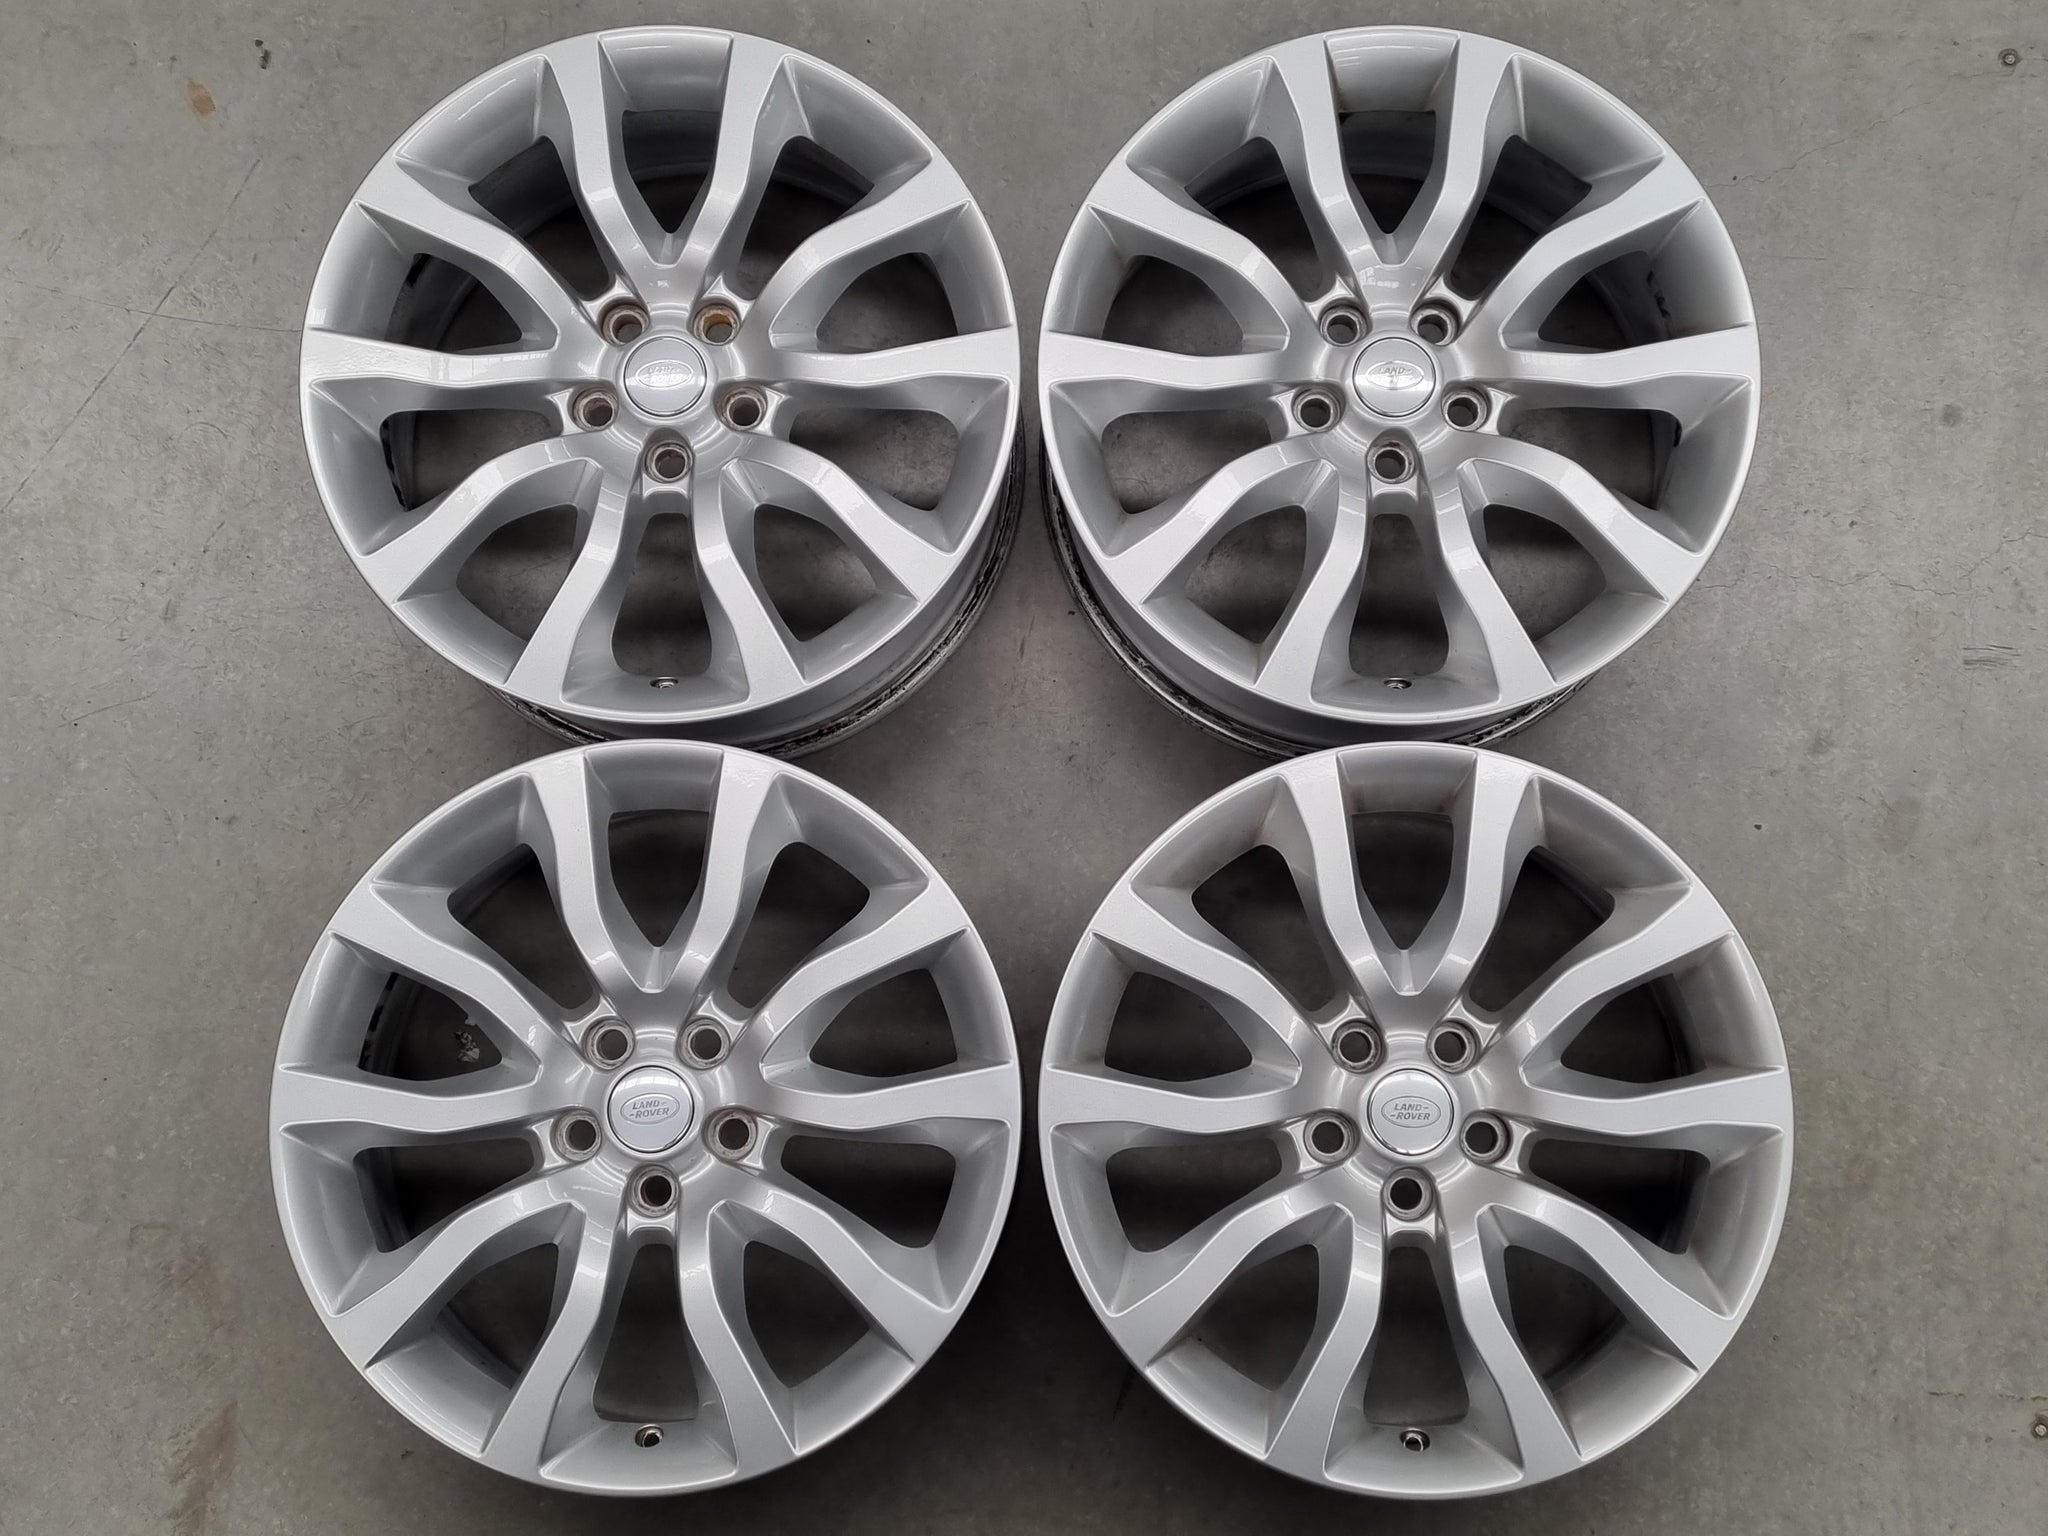 Load image into Gallery viewer, Genuine Range Rover Sport 20 Inch Alloy Wheels Set of 4
